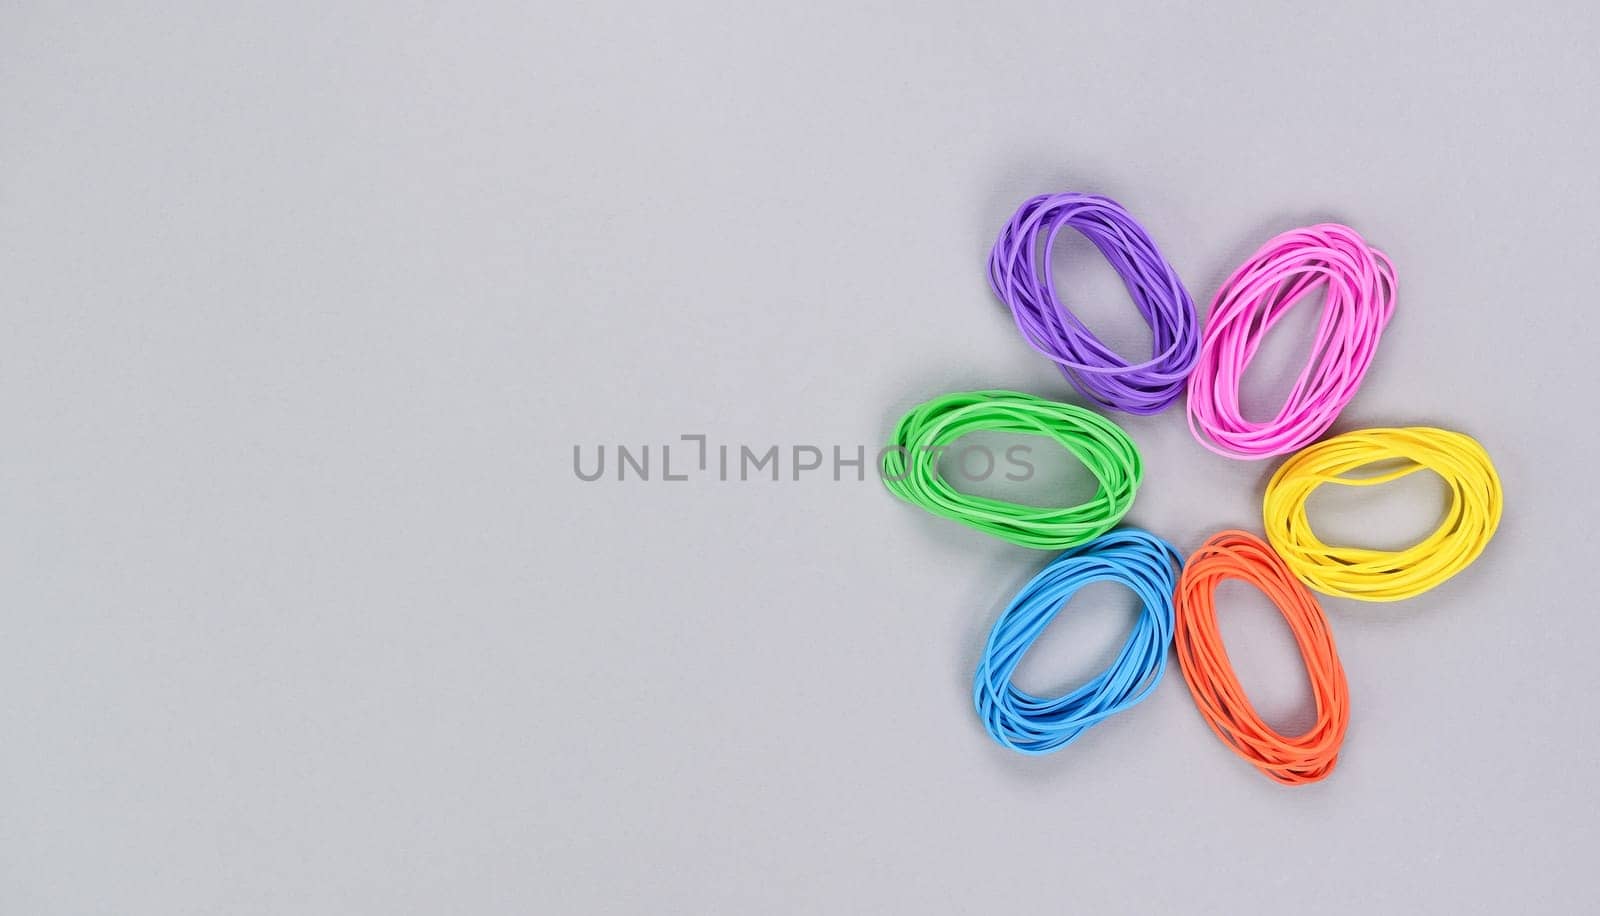 Multicolored flower made of elastic. Top view of colorful rubber bands isolated on grey. Rainbow elastic rubber bands on white. Rainbow flower shape. by JuliaDorian